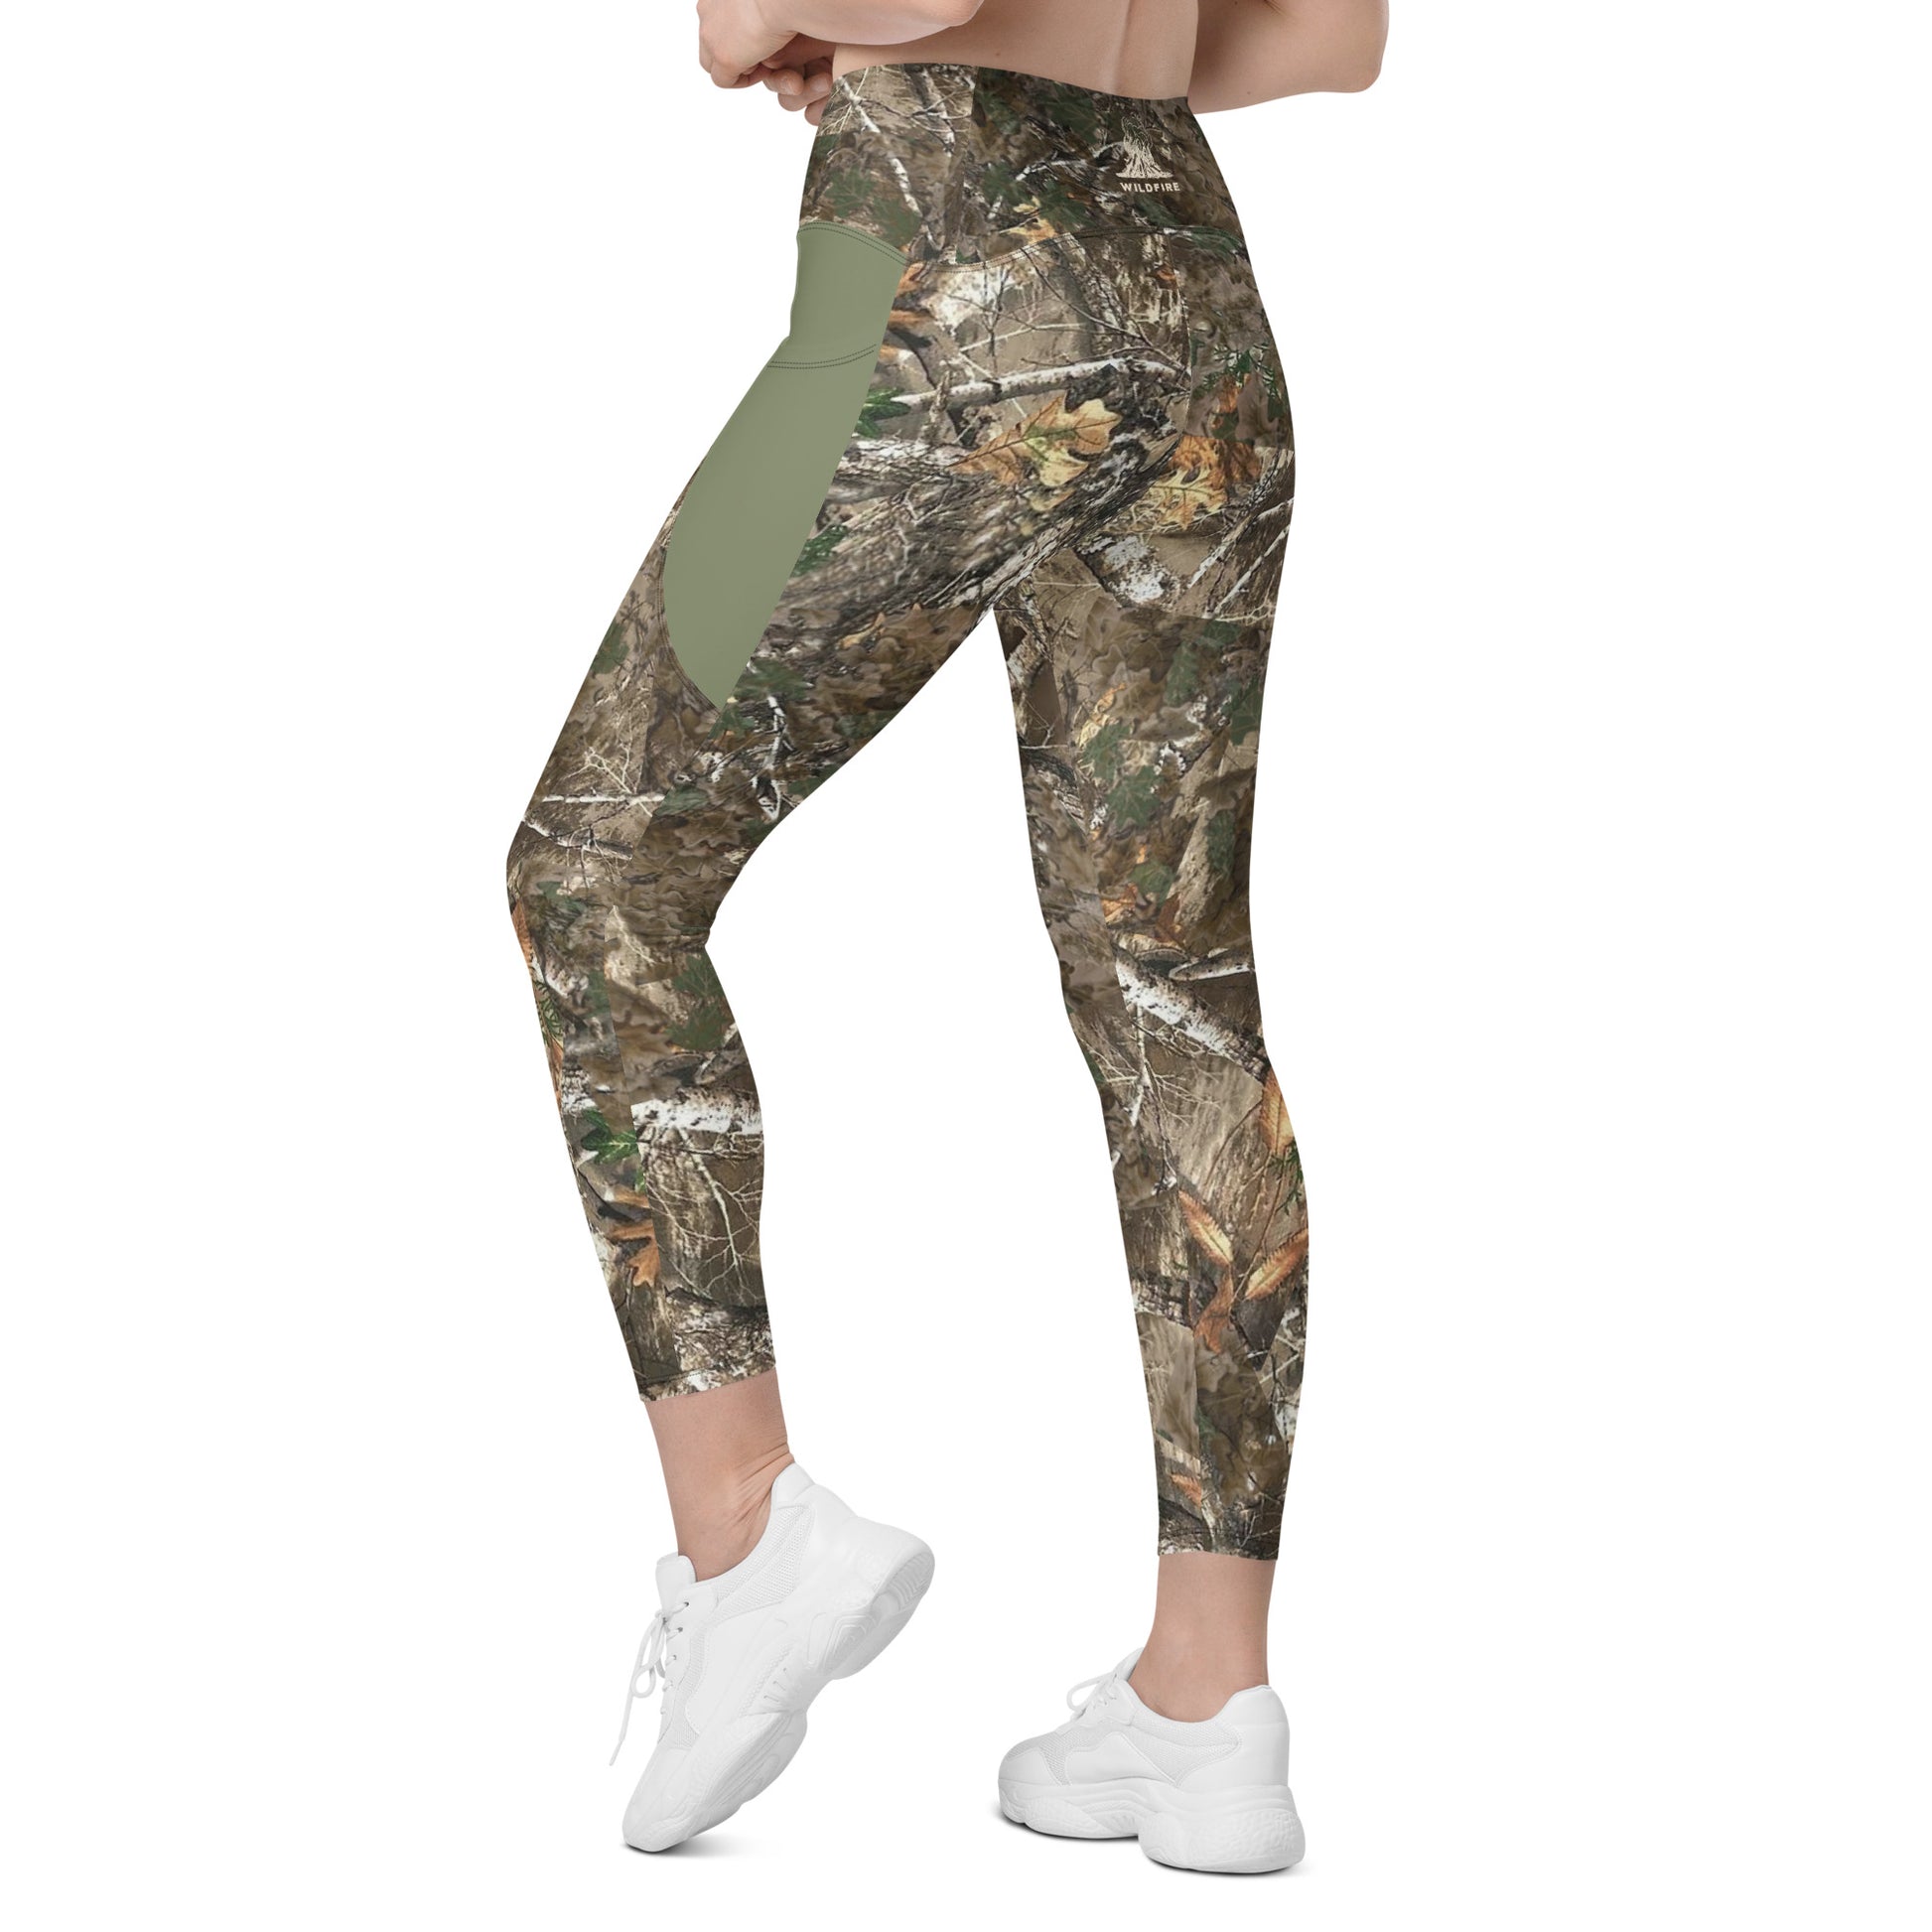 Wildfire Cigars Camouflage and military green activewear leggings facing the back left